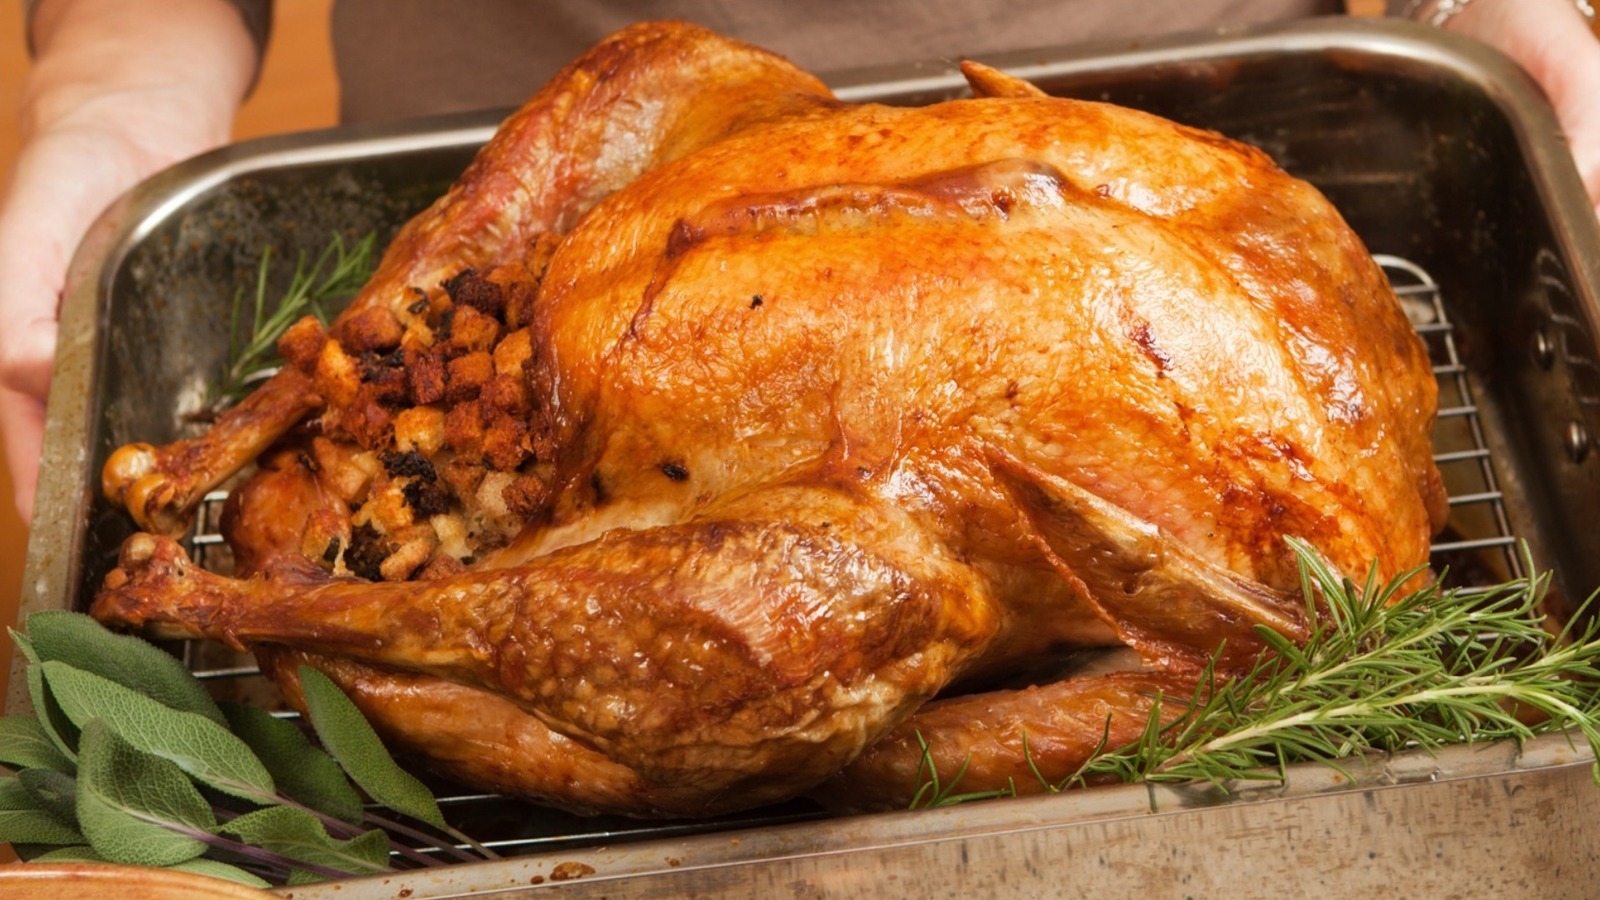 How Many Pounds Of Turkey Breast Should You Serve Per Person On Thanksgiving